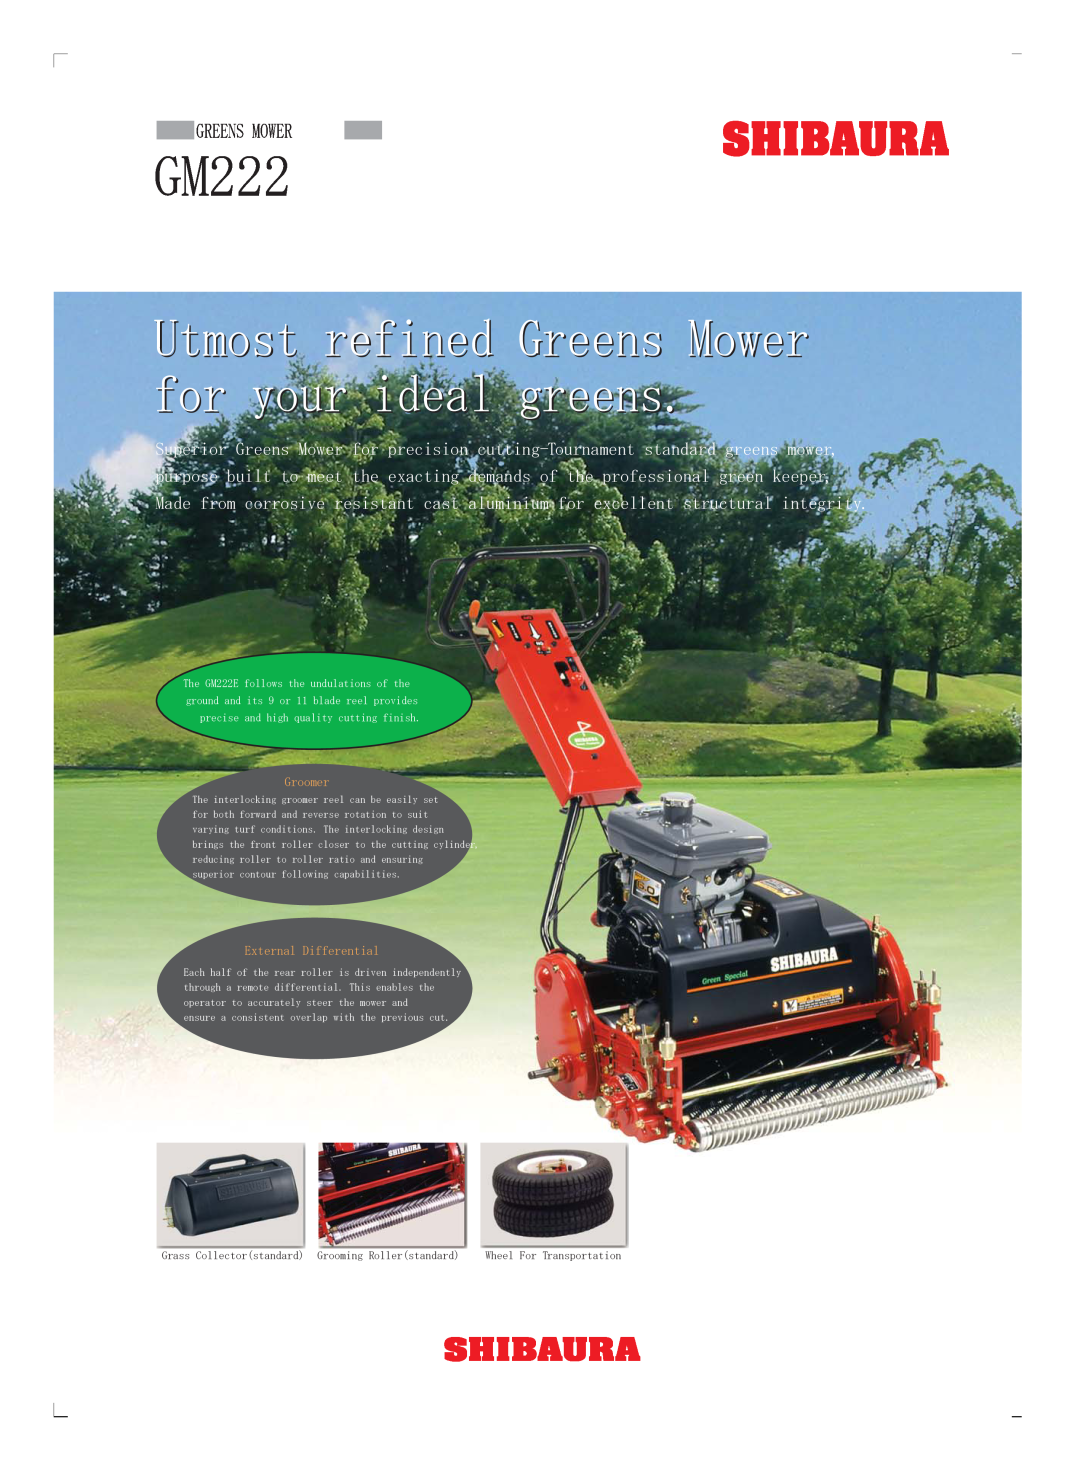 Shibaura GM222 manual Utmost refined Greens Mower for your ideal greens, Groomer, External Differential 